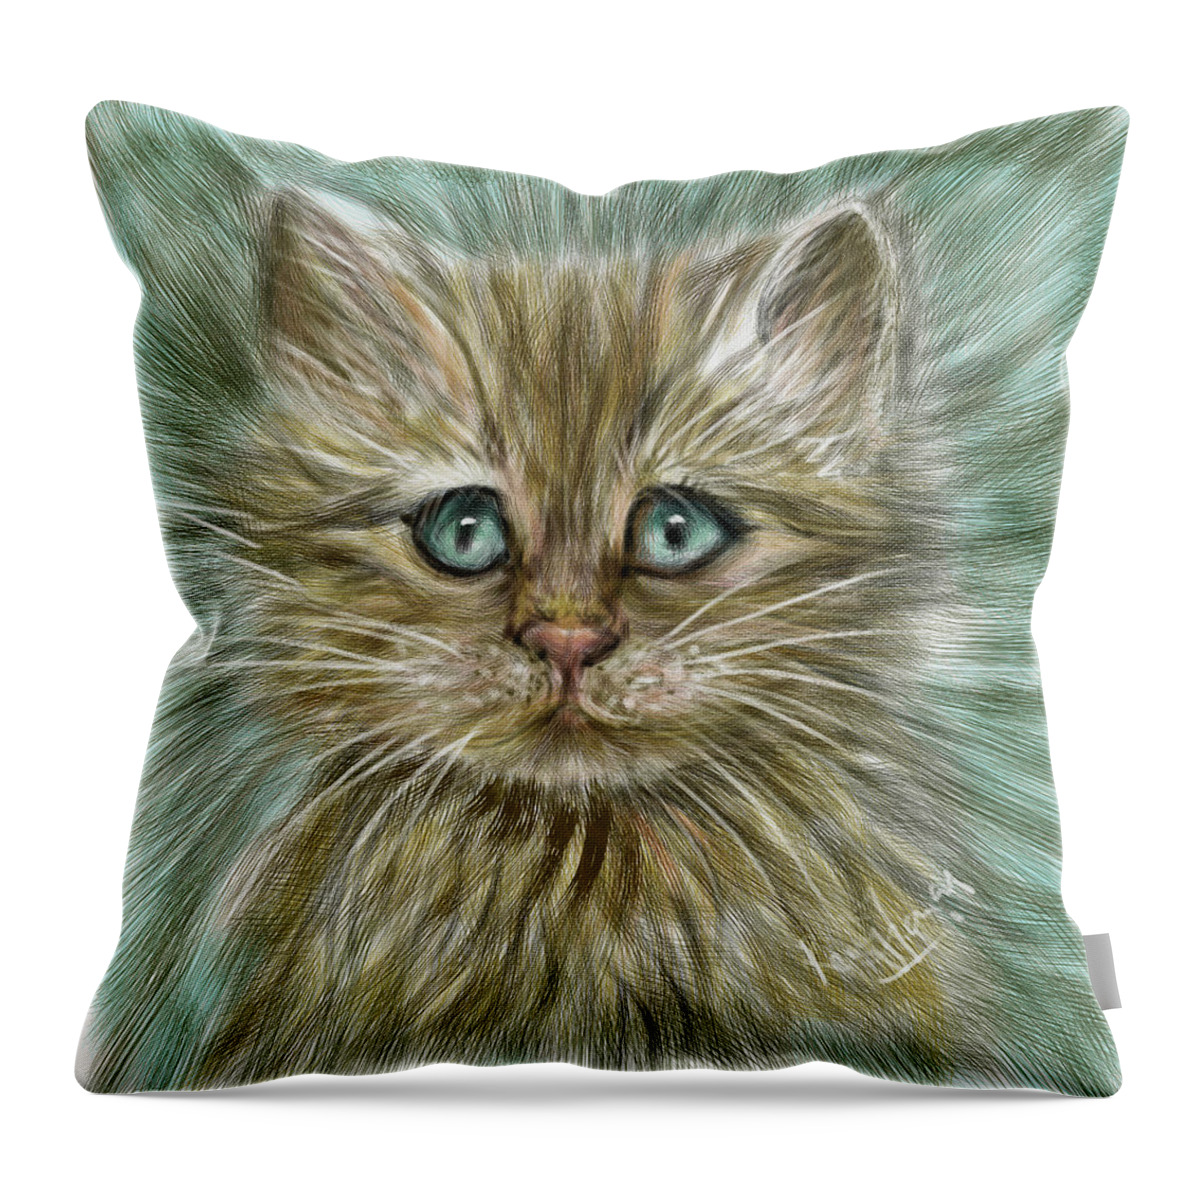 Cat Throw Pillow featuring the digital art Mesmerizing Kitten by Remy Francis